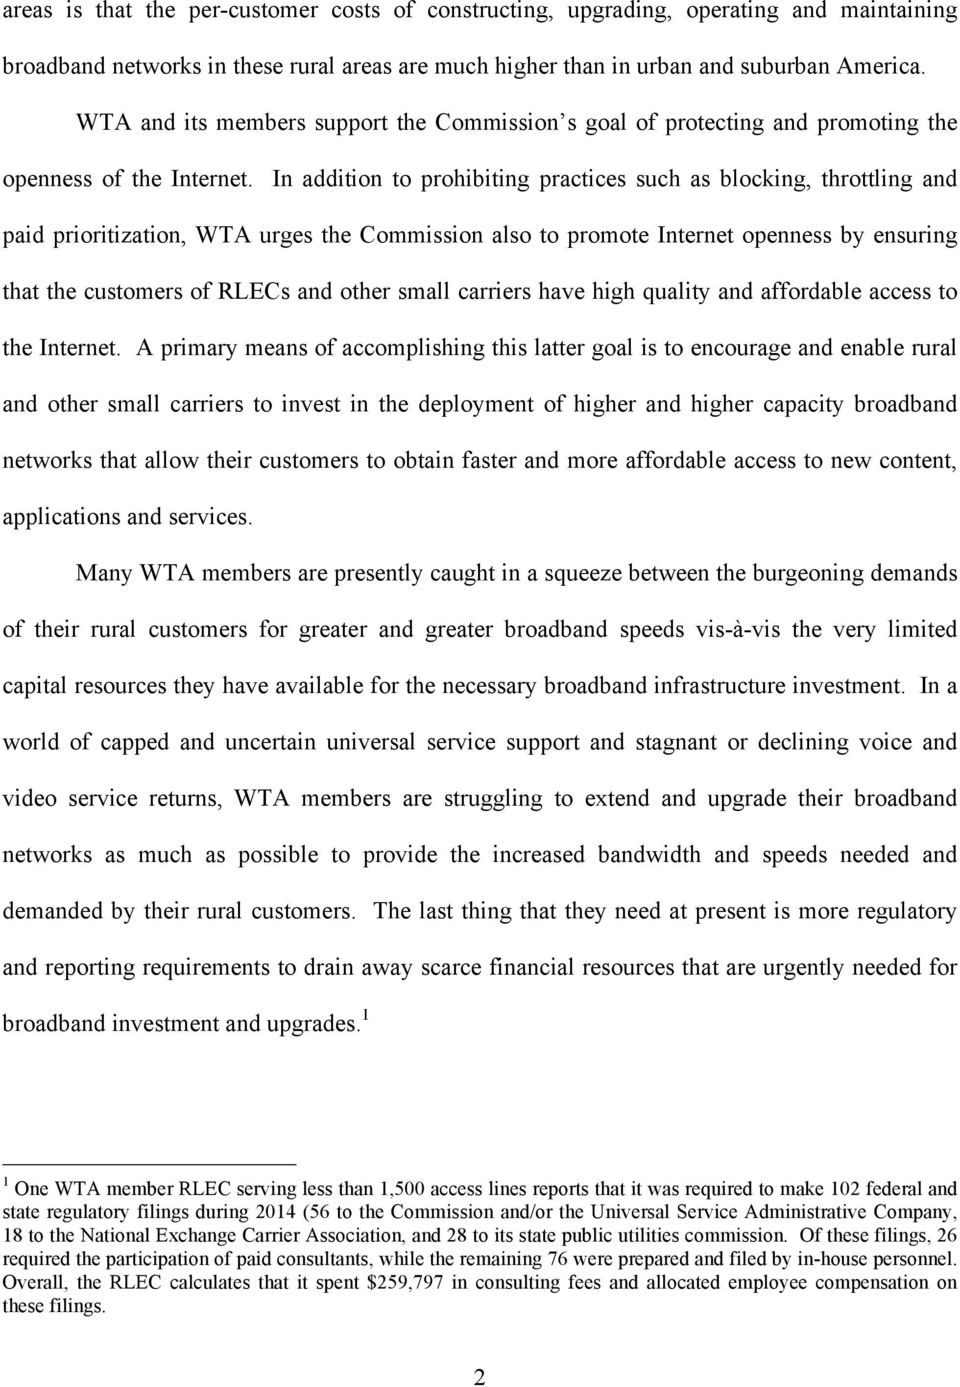 In addition to prohibiting practices such as blocking, throttling and paid prioritization, WTA urges the Commission also to promote Internet openness by ensuring that the customers of RLECs and other